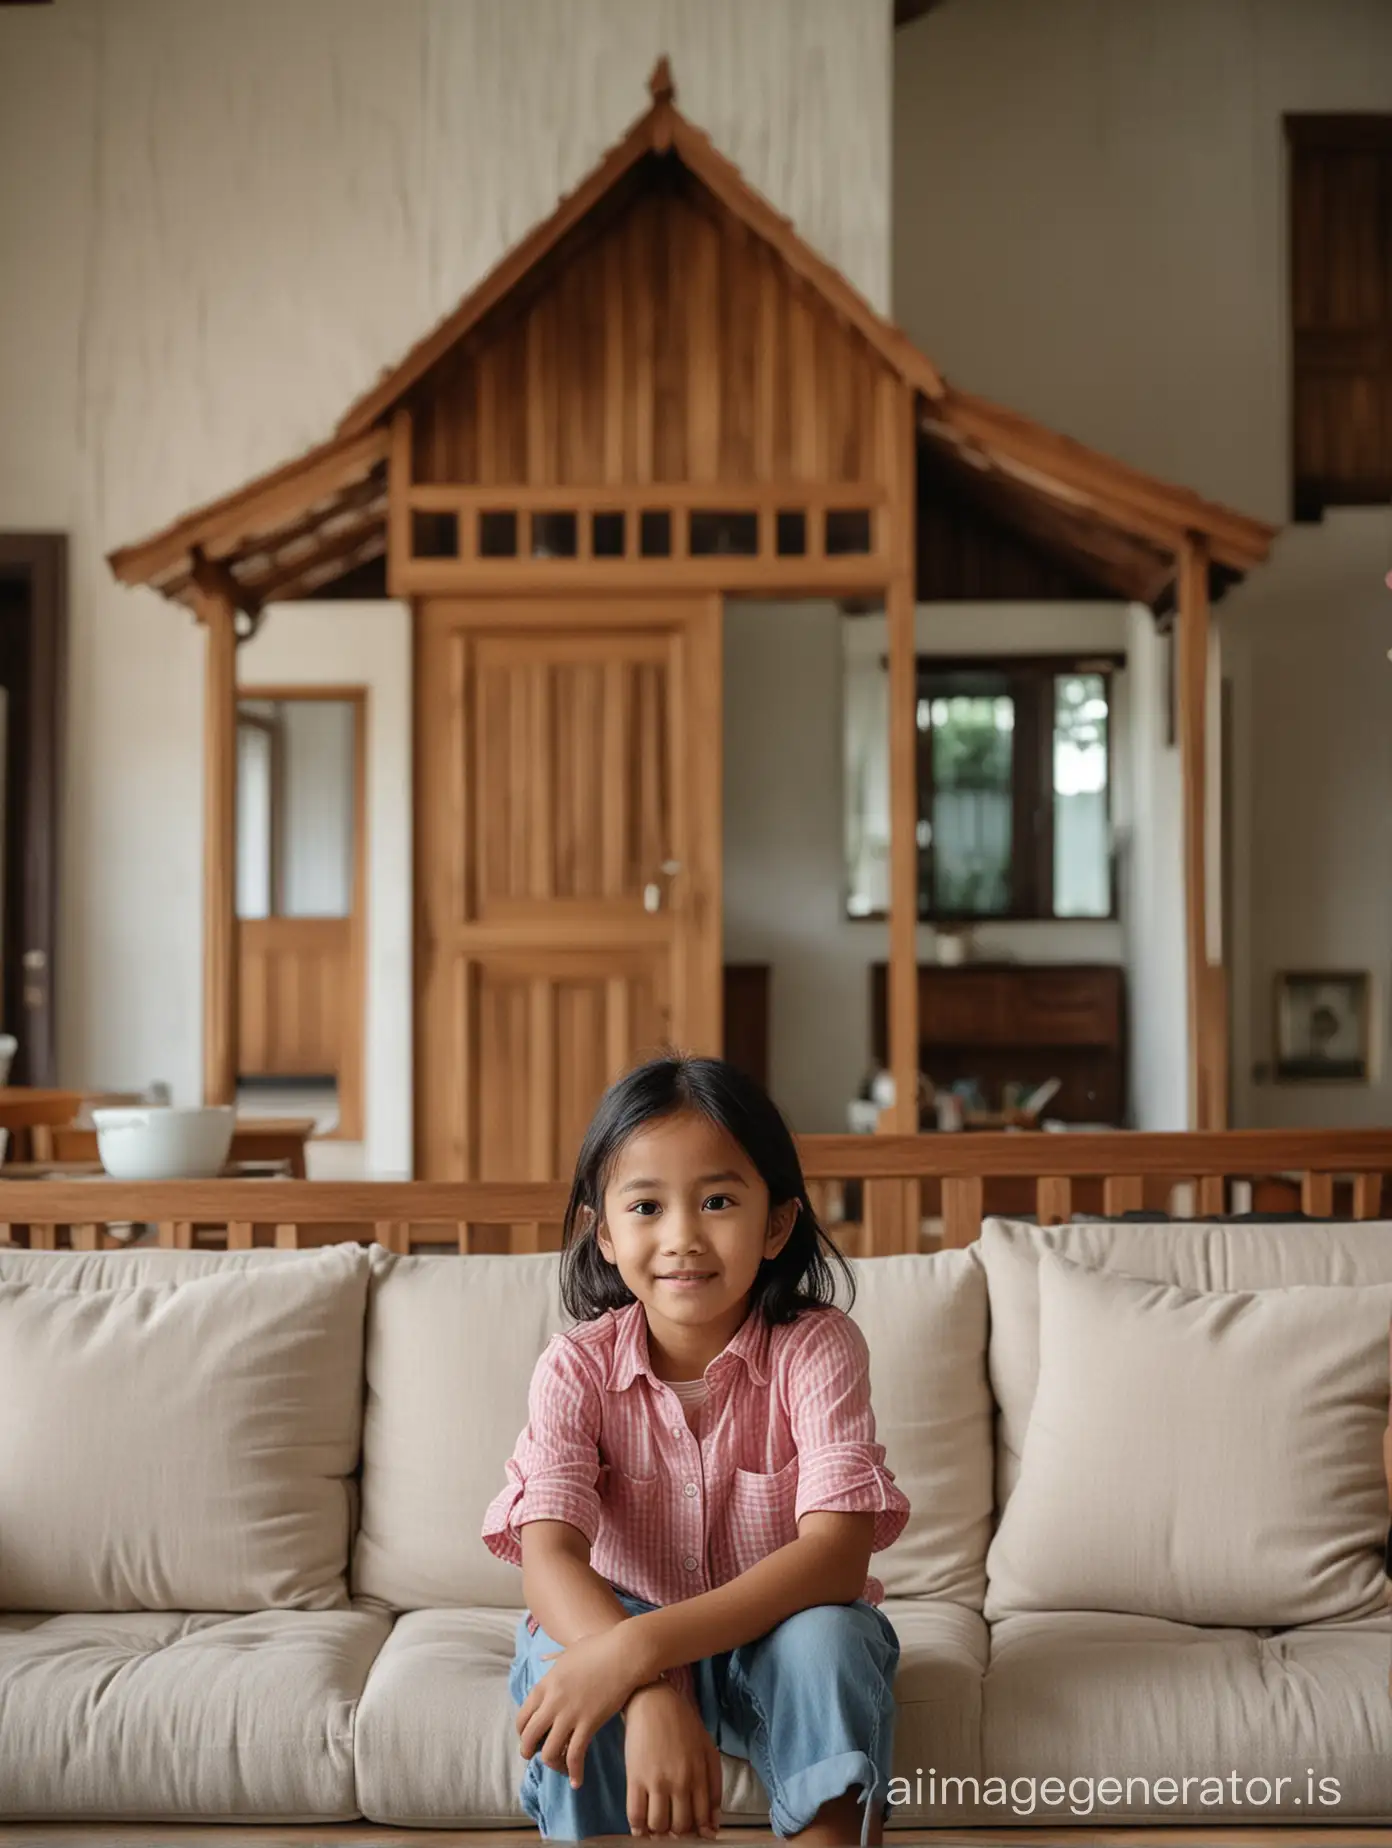 A six-year-old Indonesian girl in casual clothing sits on a sofa with a background of a classic wooden house